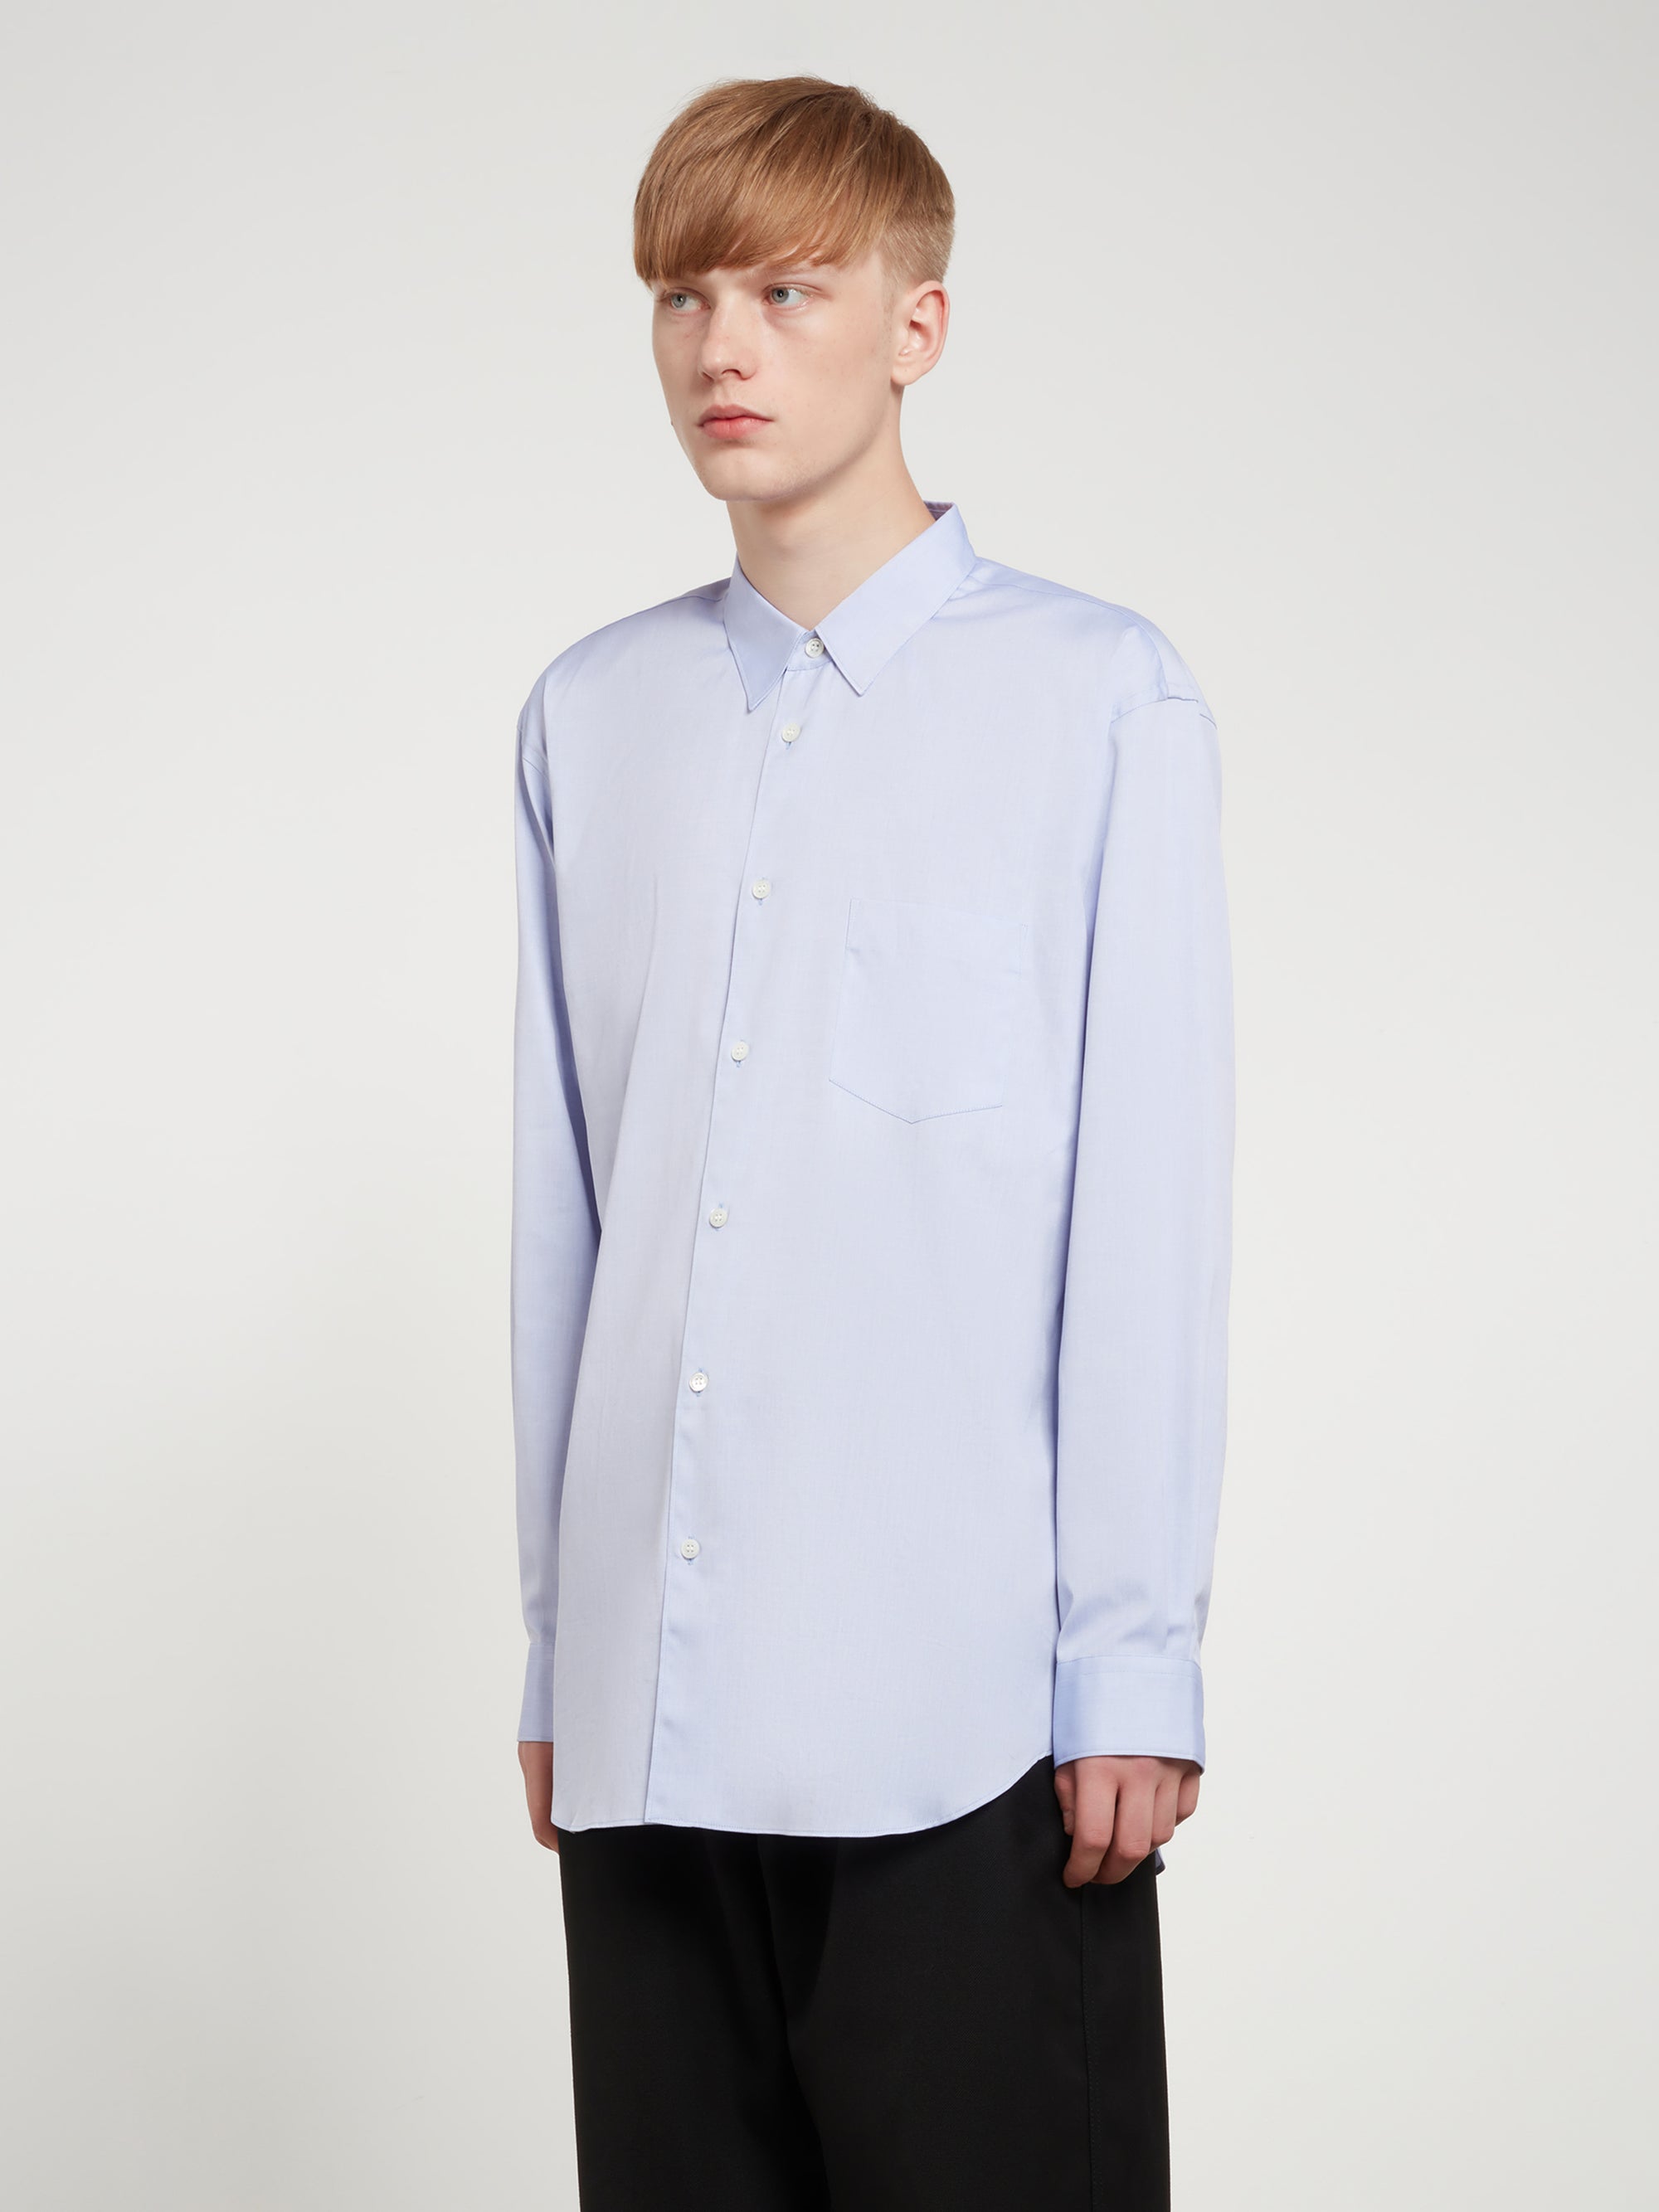 CDG Shirt Forever - Classic Fit Woven Cotton Shirt - (Light Blue) view 3